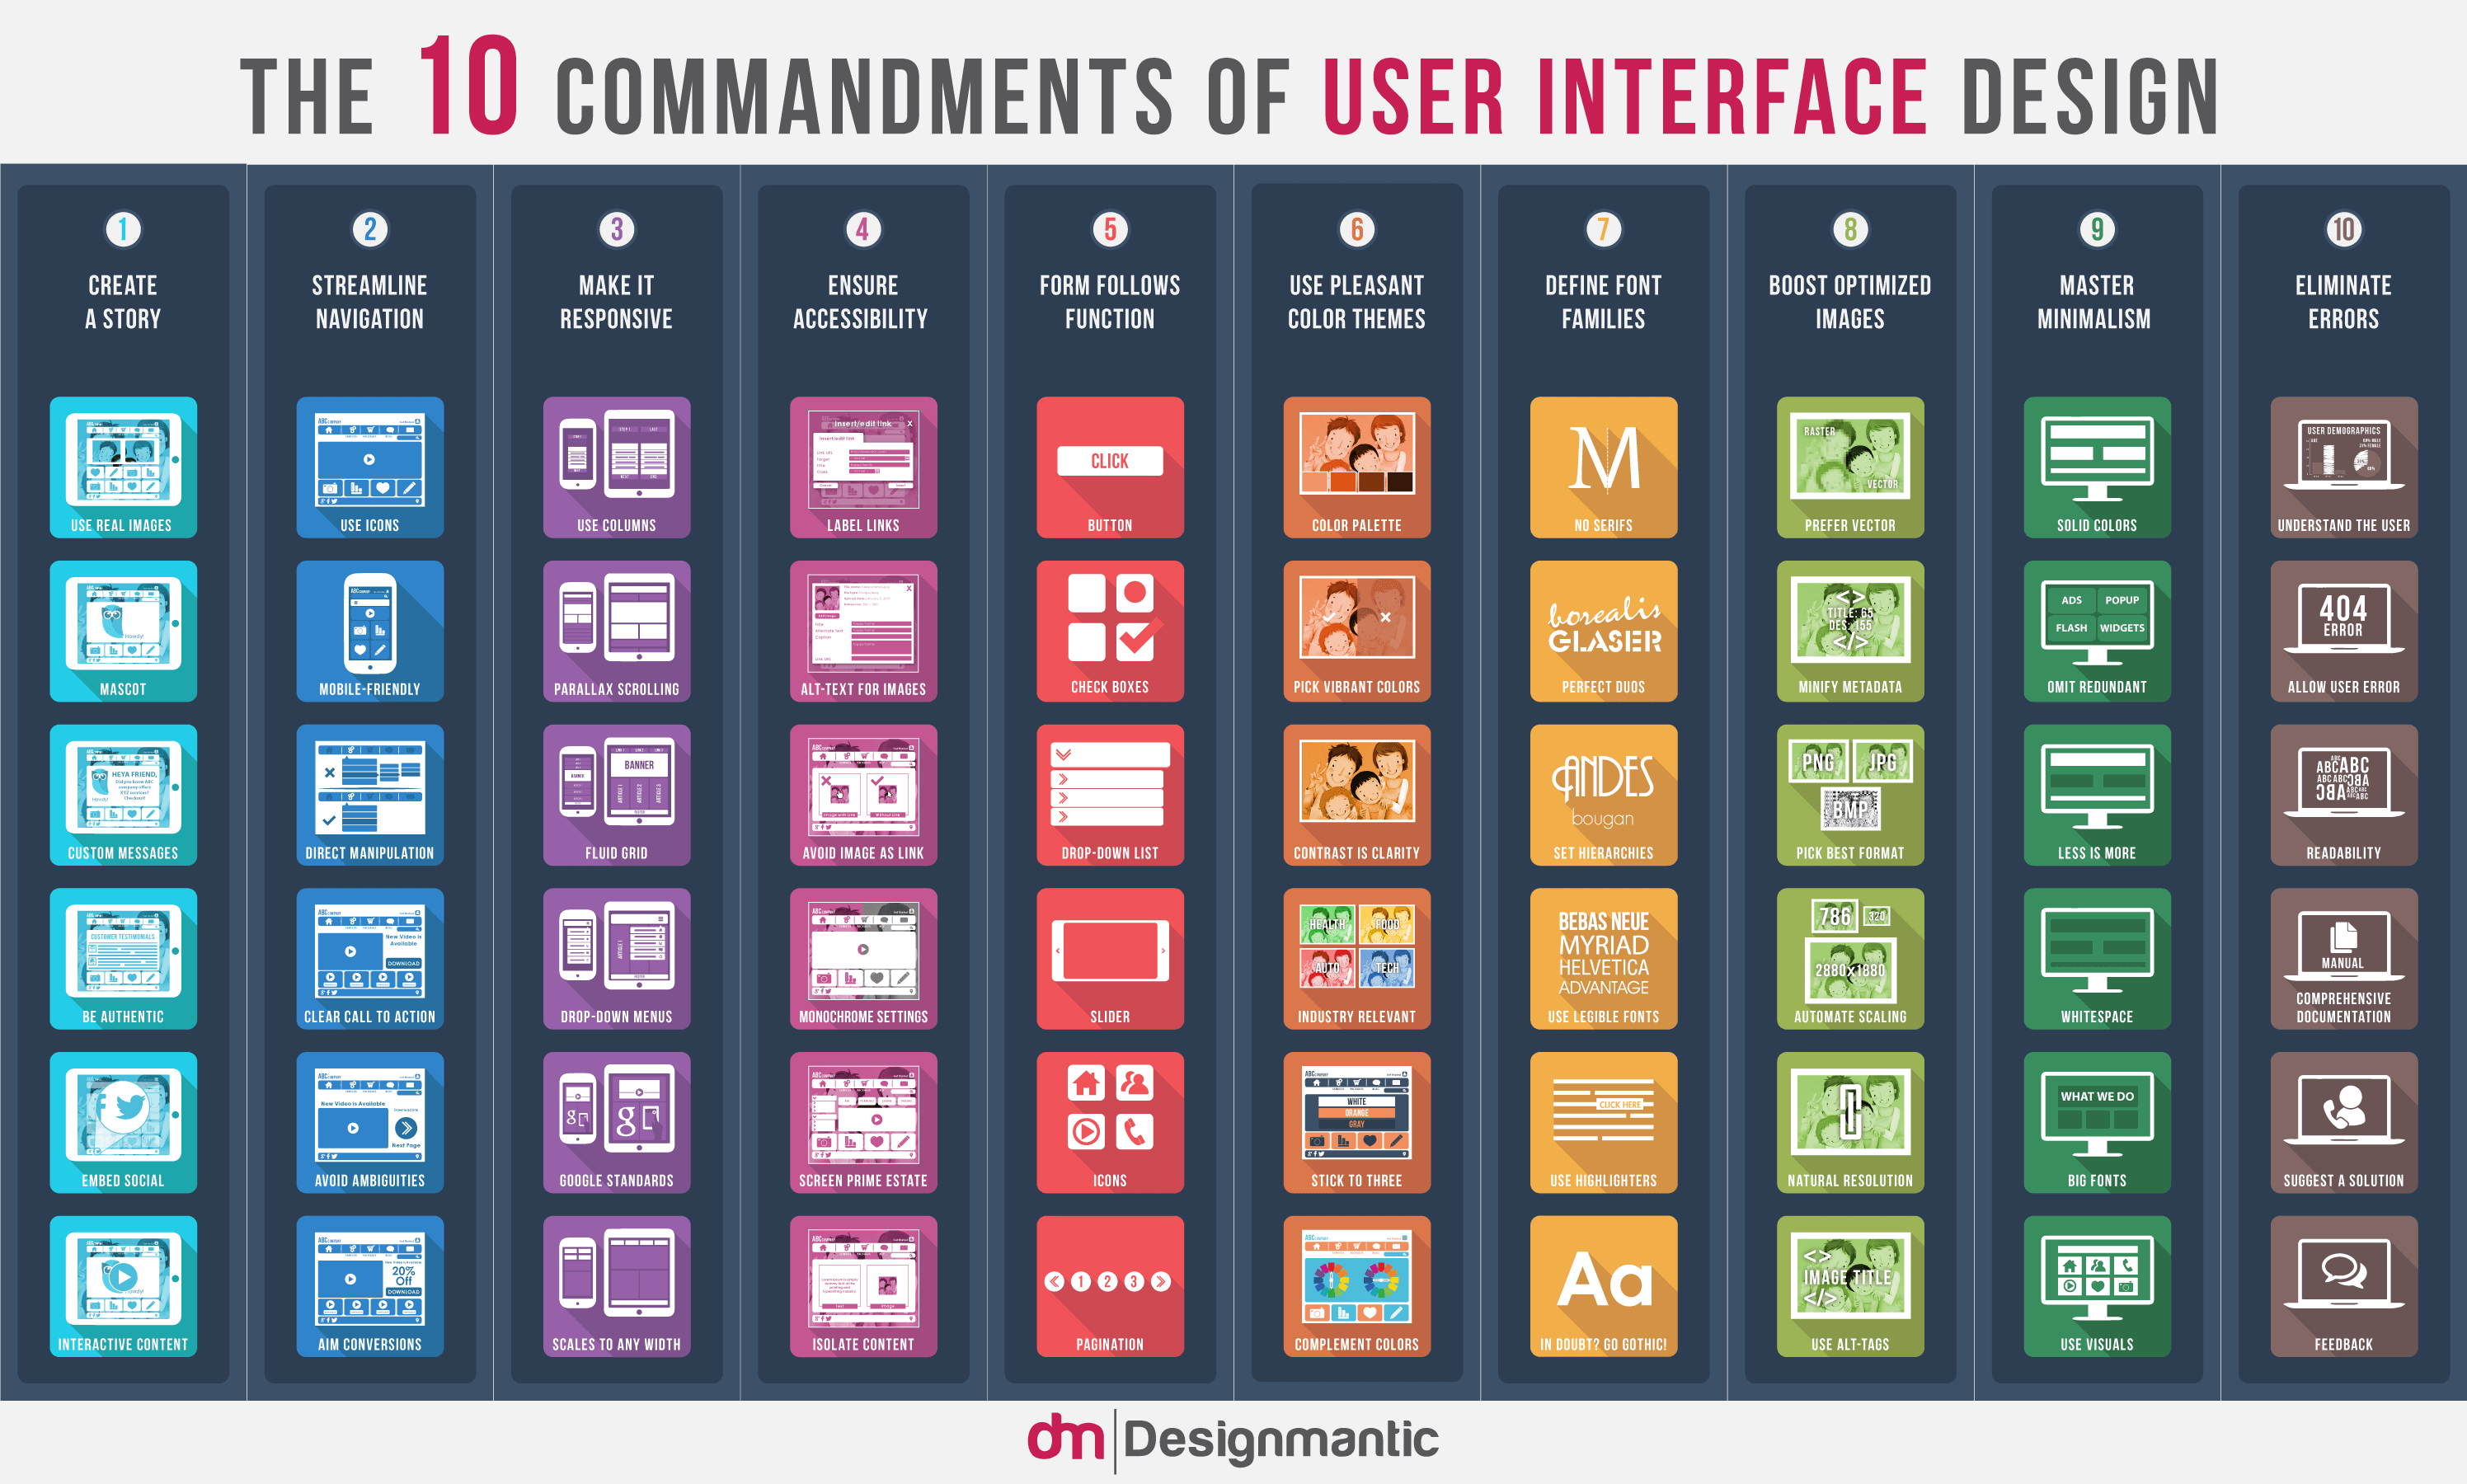 The 10 commandments of user interface design